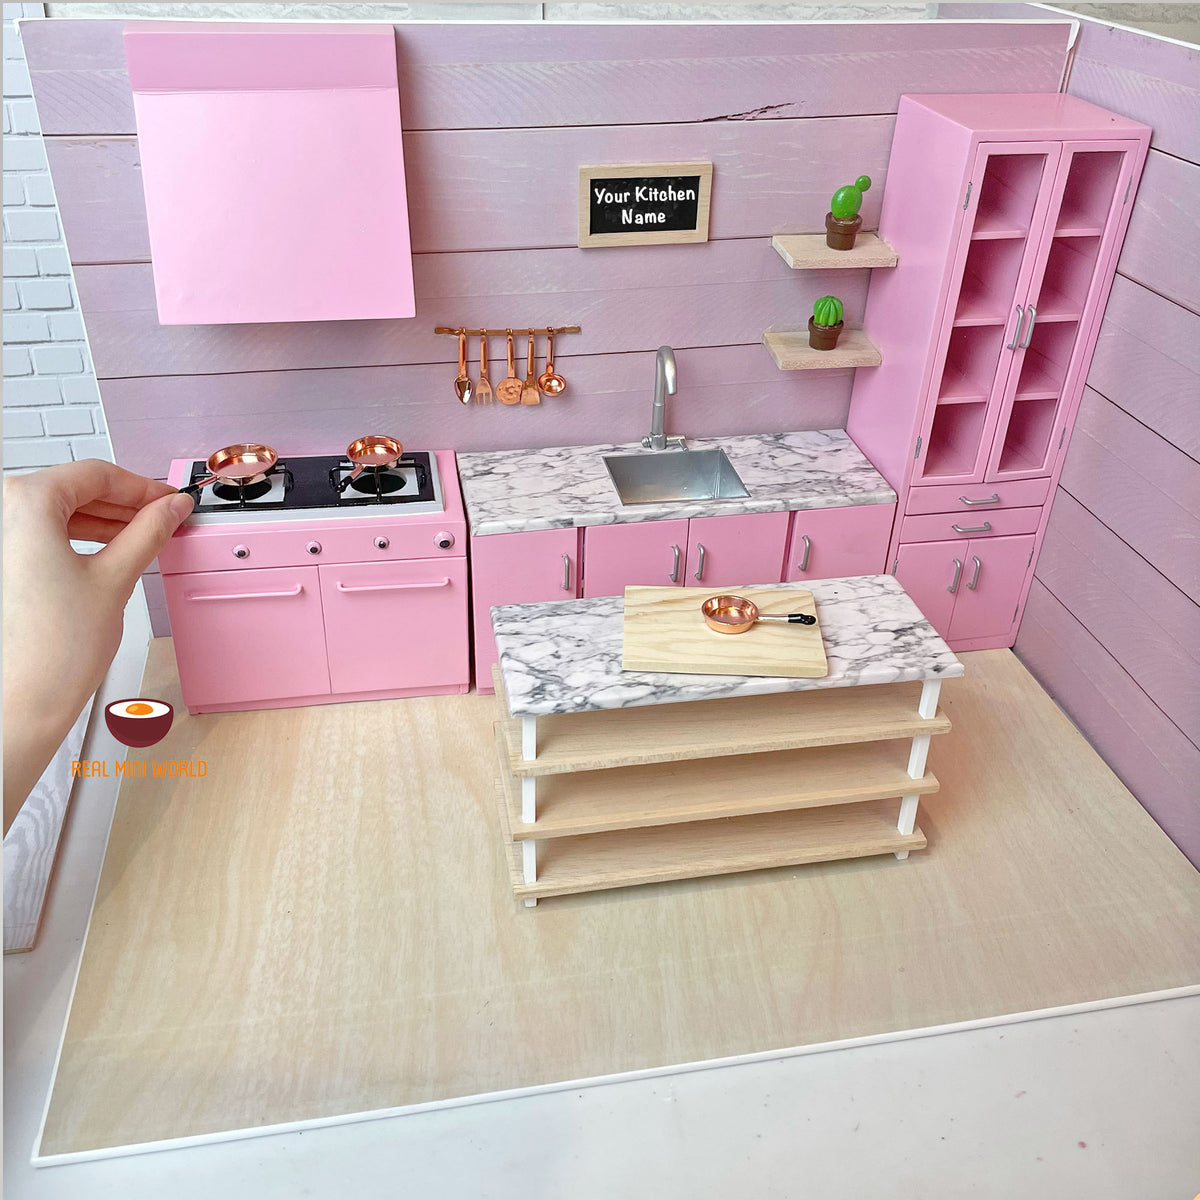 DIY Realistic Miniature Blender with box for DollHouse